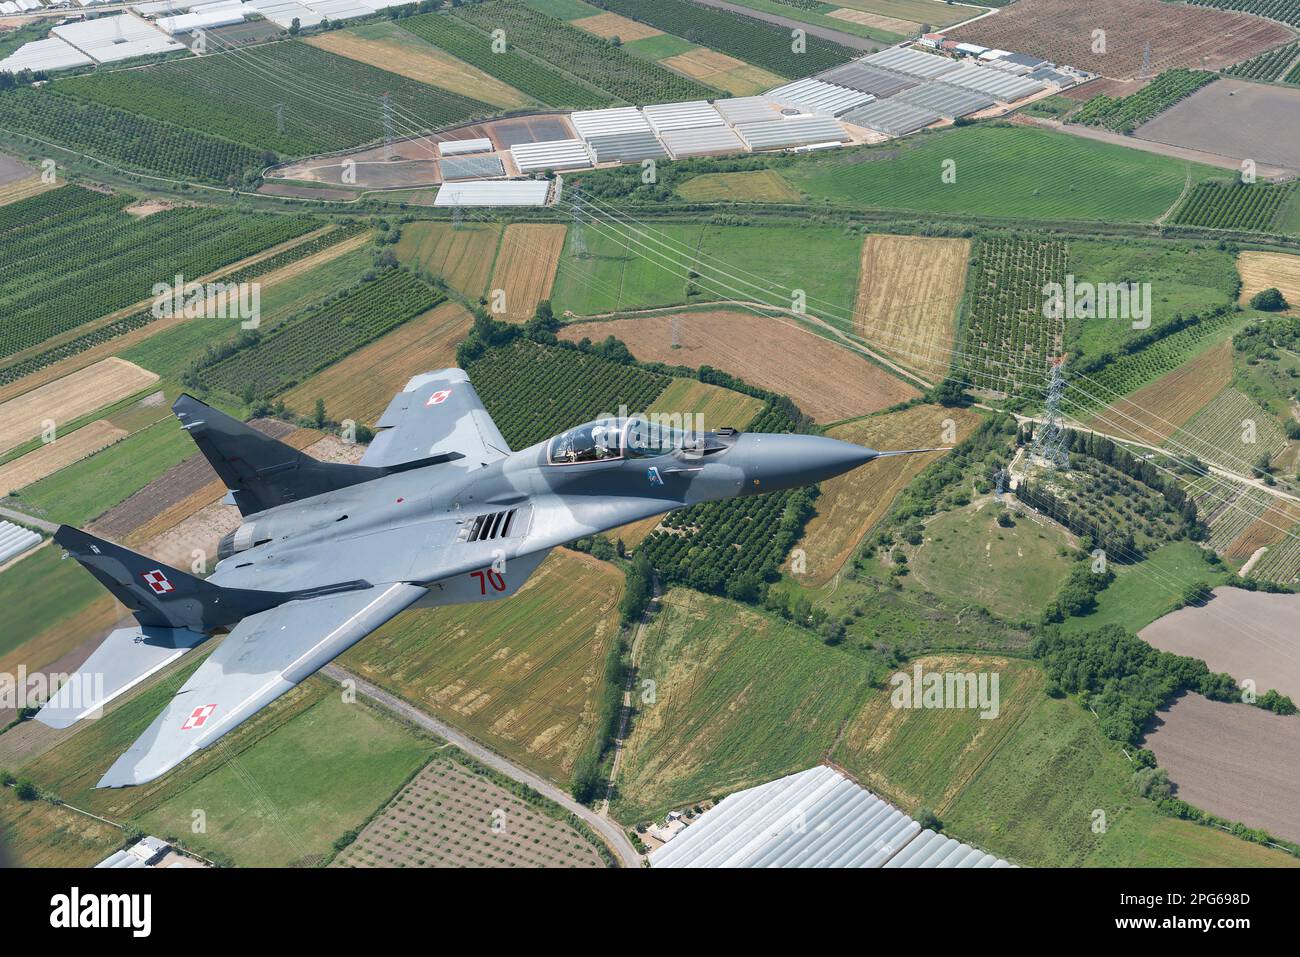 Polish Air Force Mig-29 Fighter Jet flying Above Turkey Countryside During Air-To-Air Flight Stock Photo